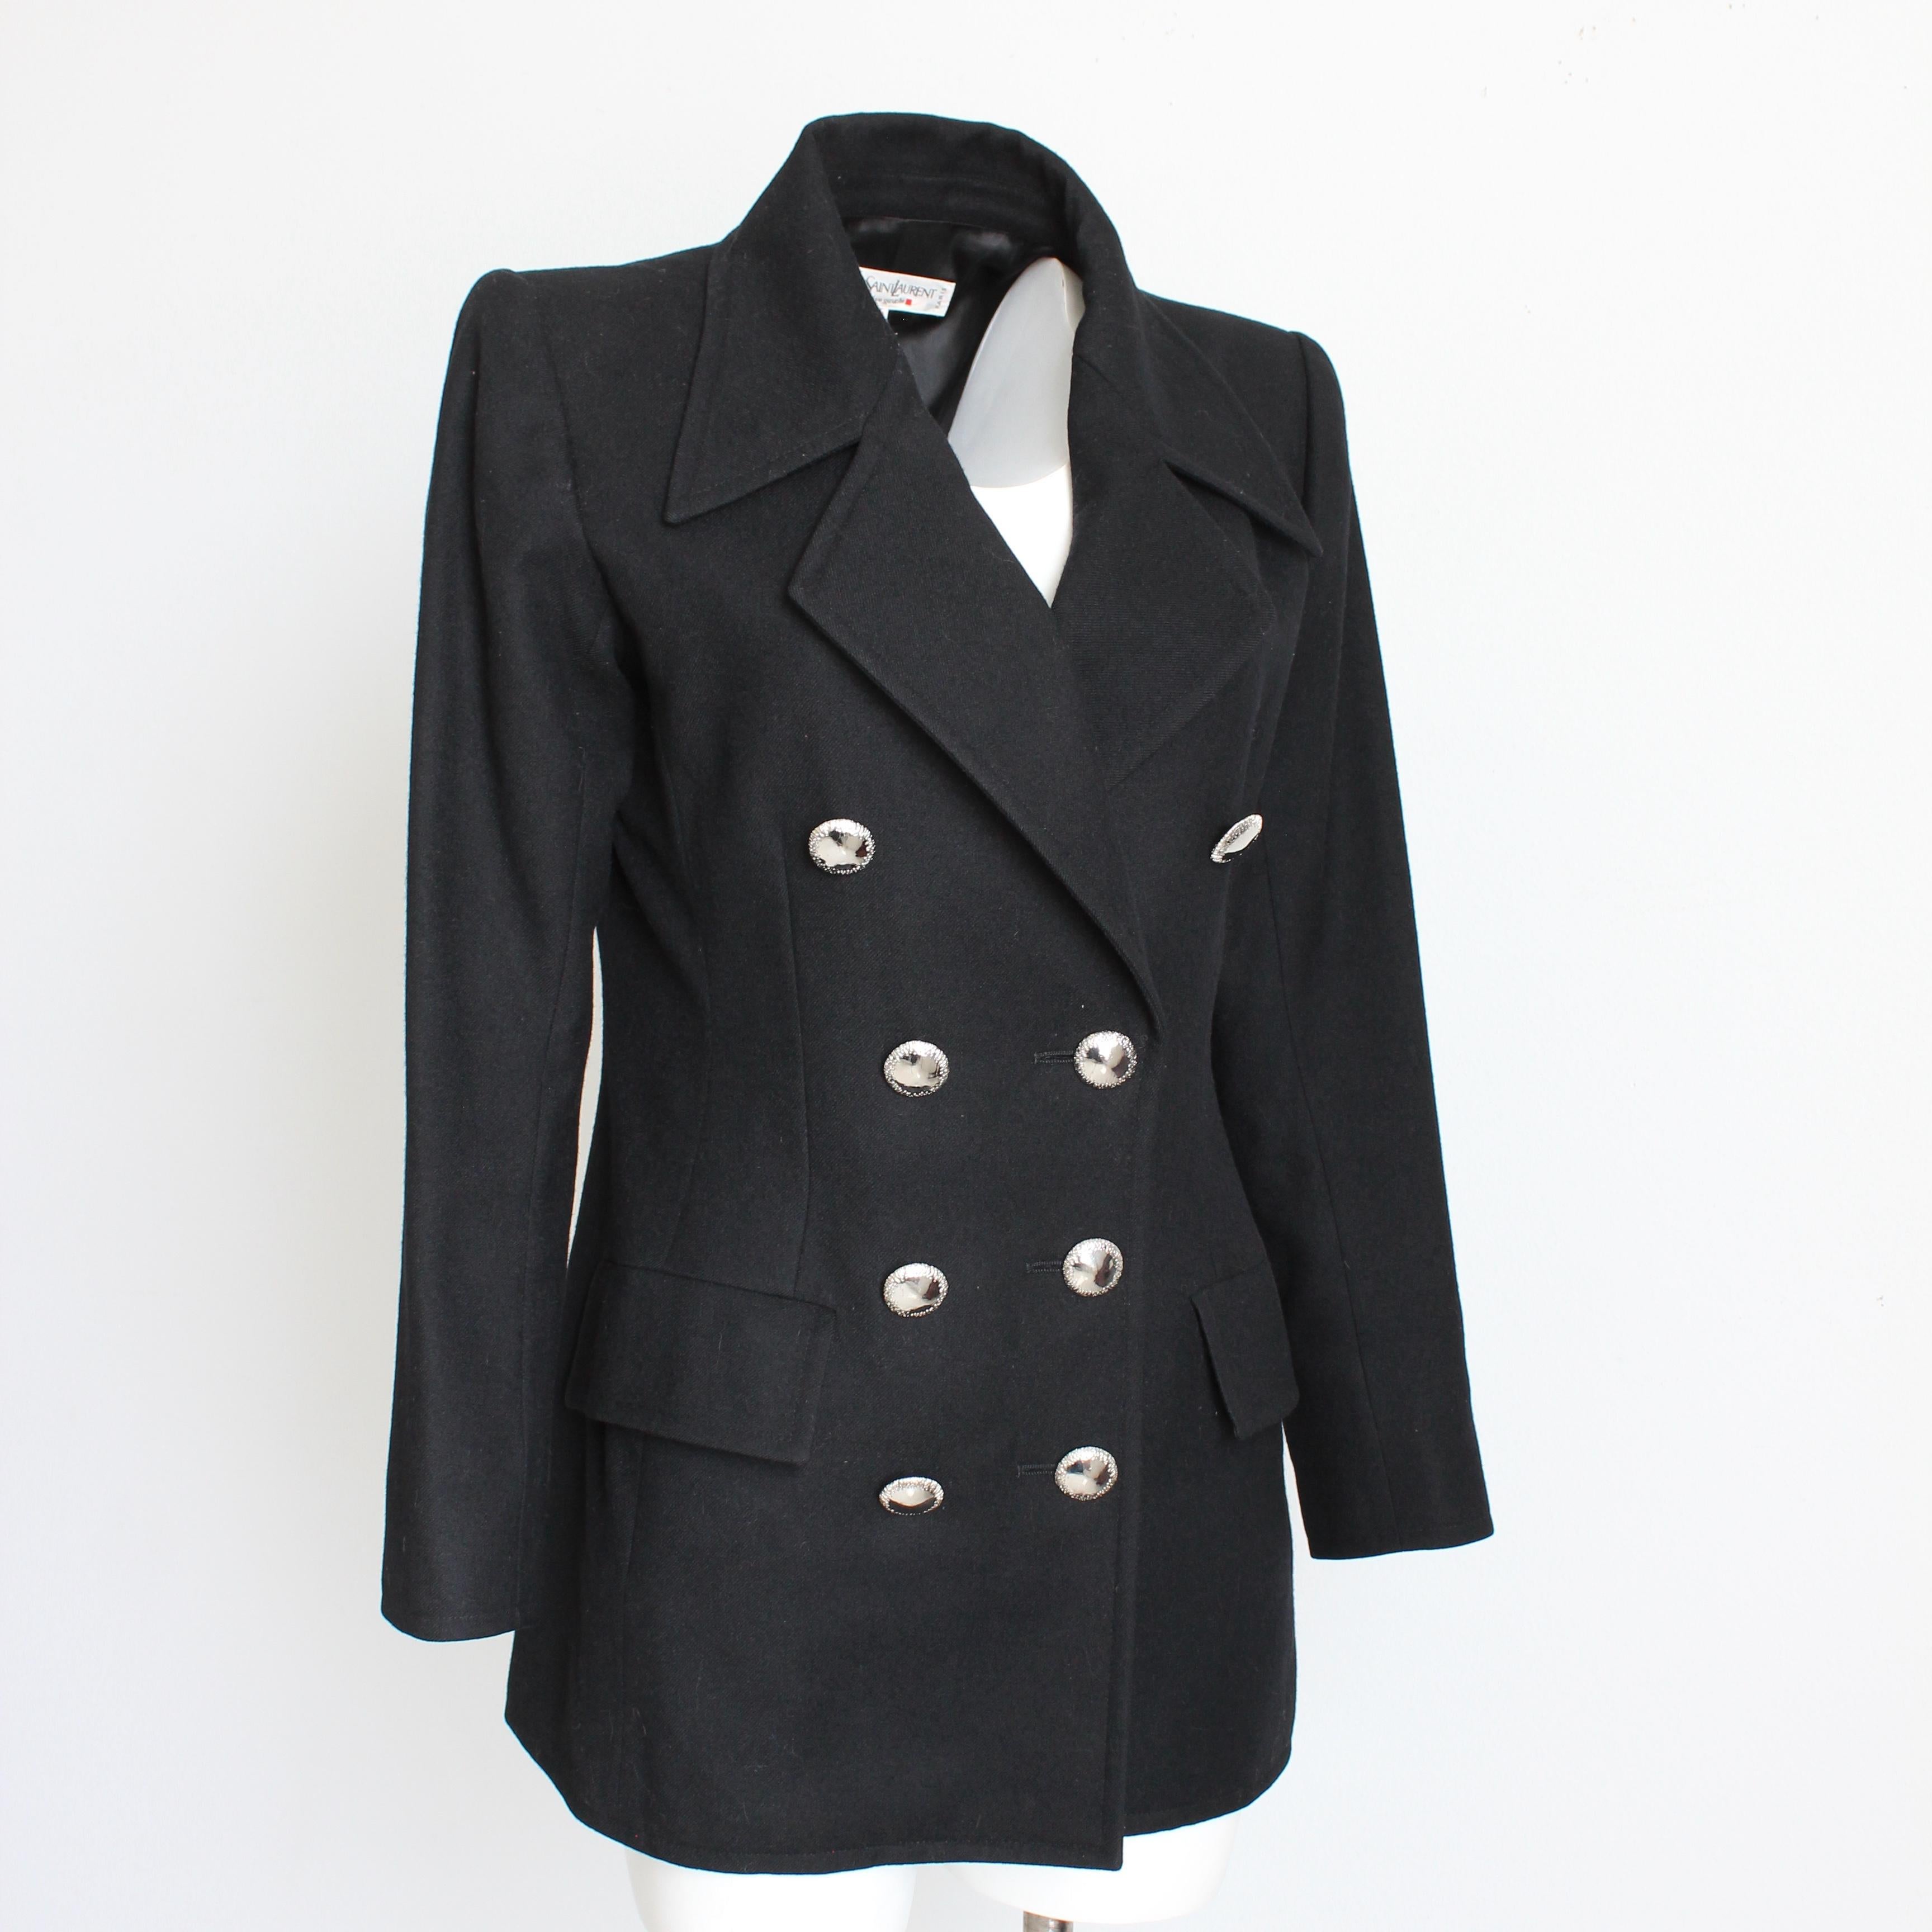 Yves Saint Laurent Jacket Black Wool Double Breasted Pea Coat Style Vintage 90s In Good Condition For Sale In Port Saint Lucie, FL